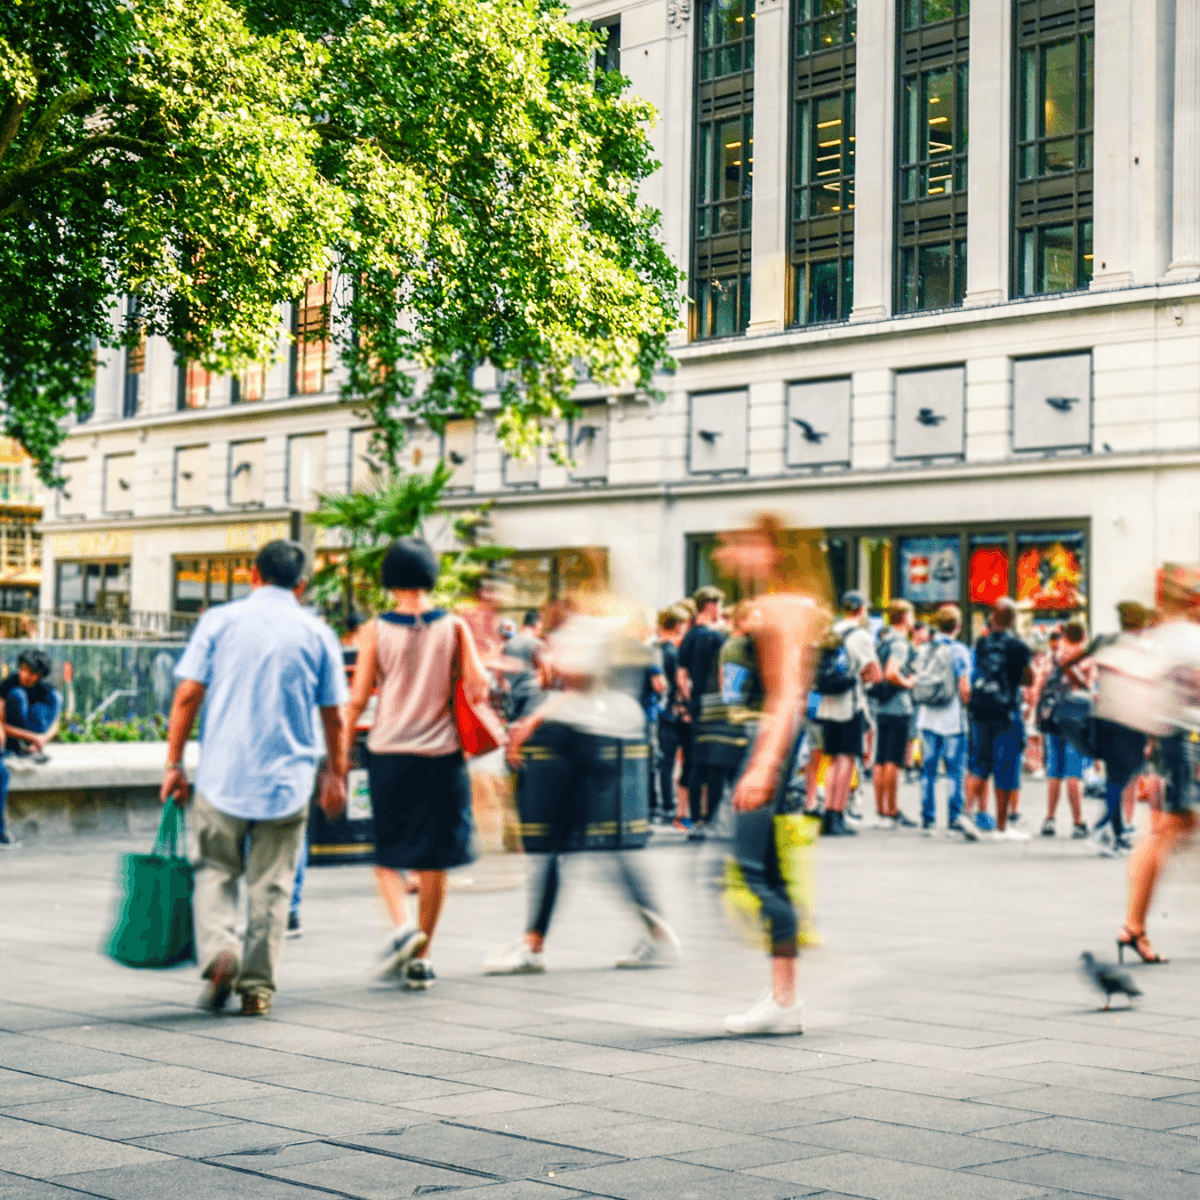 an image of a busy shopping square with shoppers carrying carrier bags walking by